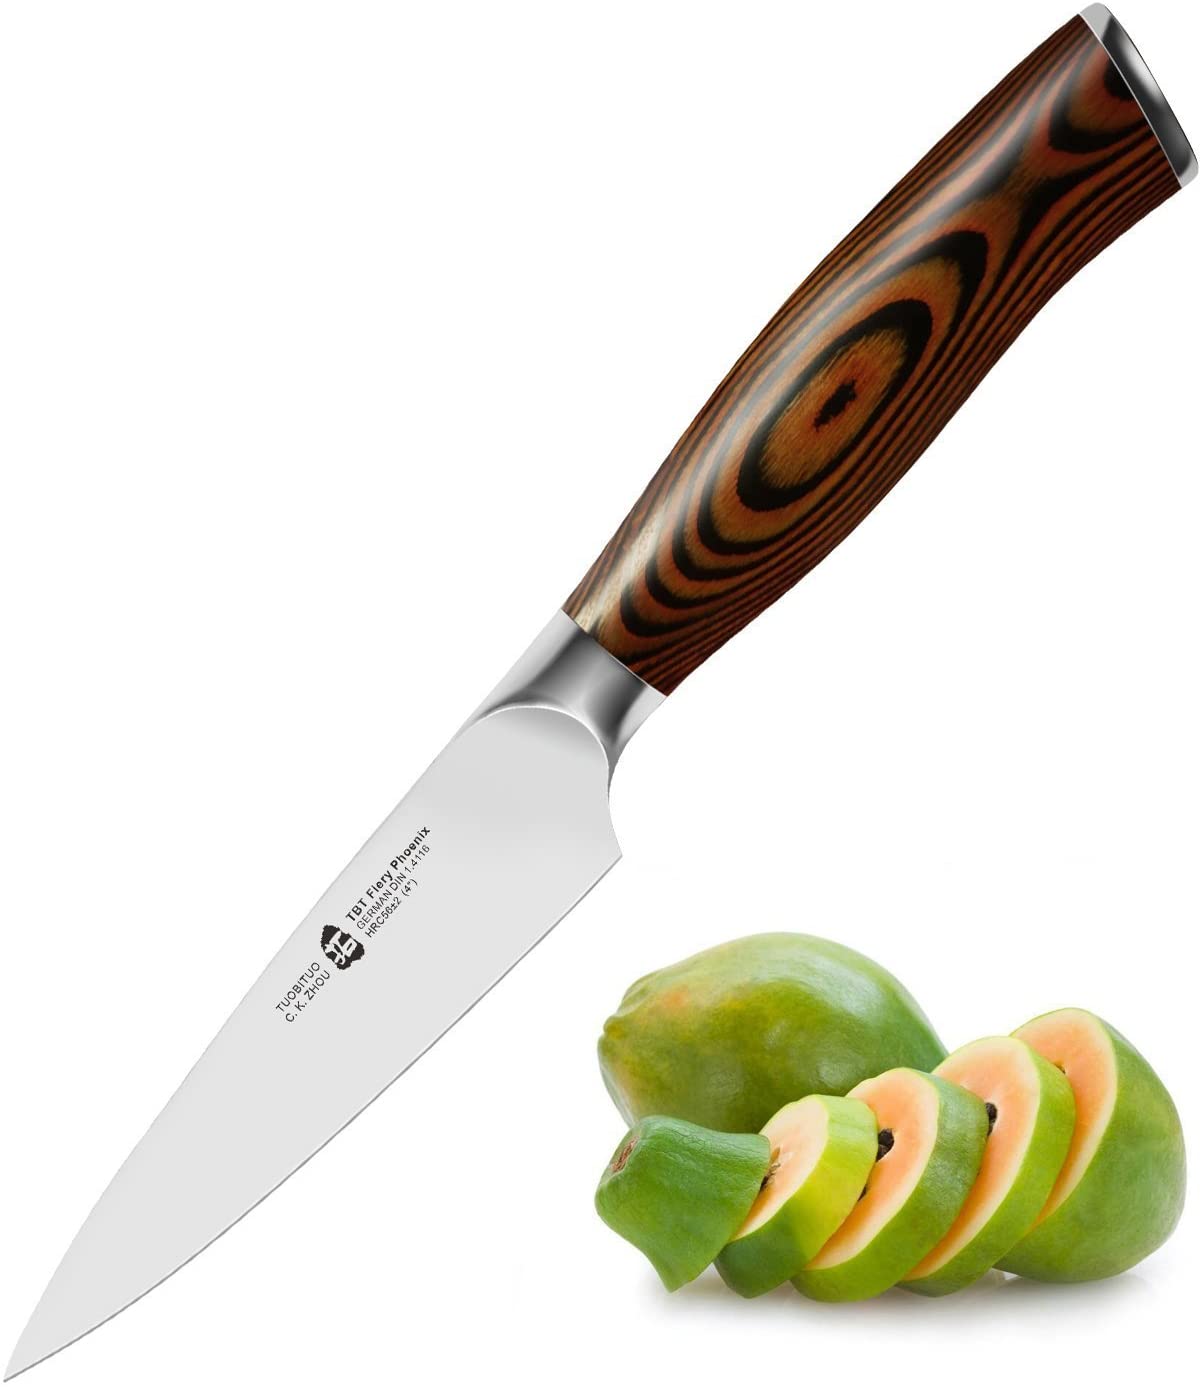 TUO-Cutlery-Paring-Knife-Small-Kitchen-Knife-Fruit-Knife-3-5-inch-German-Steel-with-Pakkawood-Handle-with-Case-4-Fiery-Series